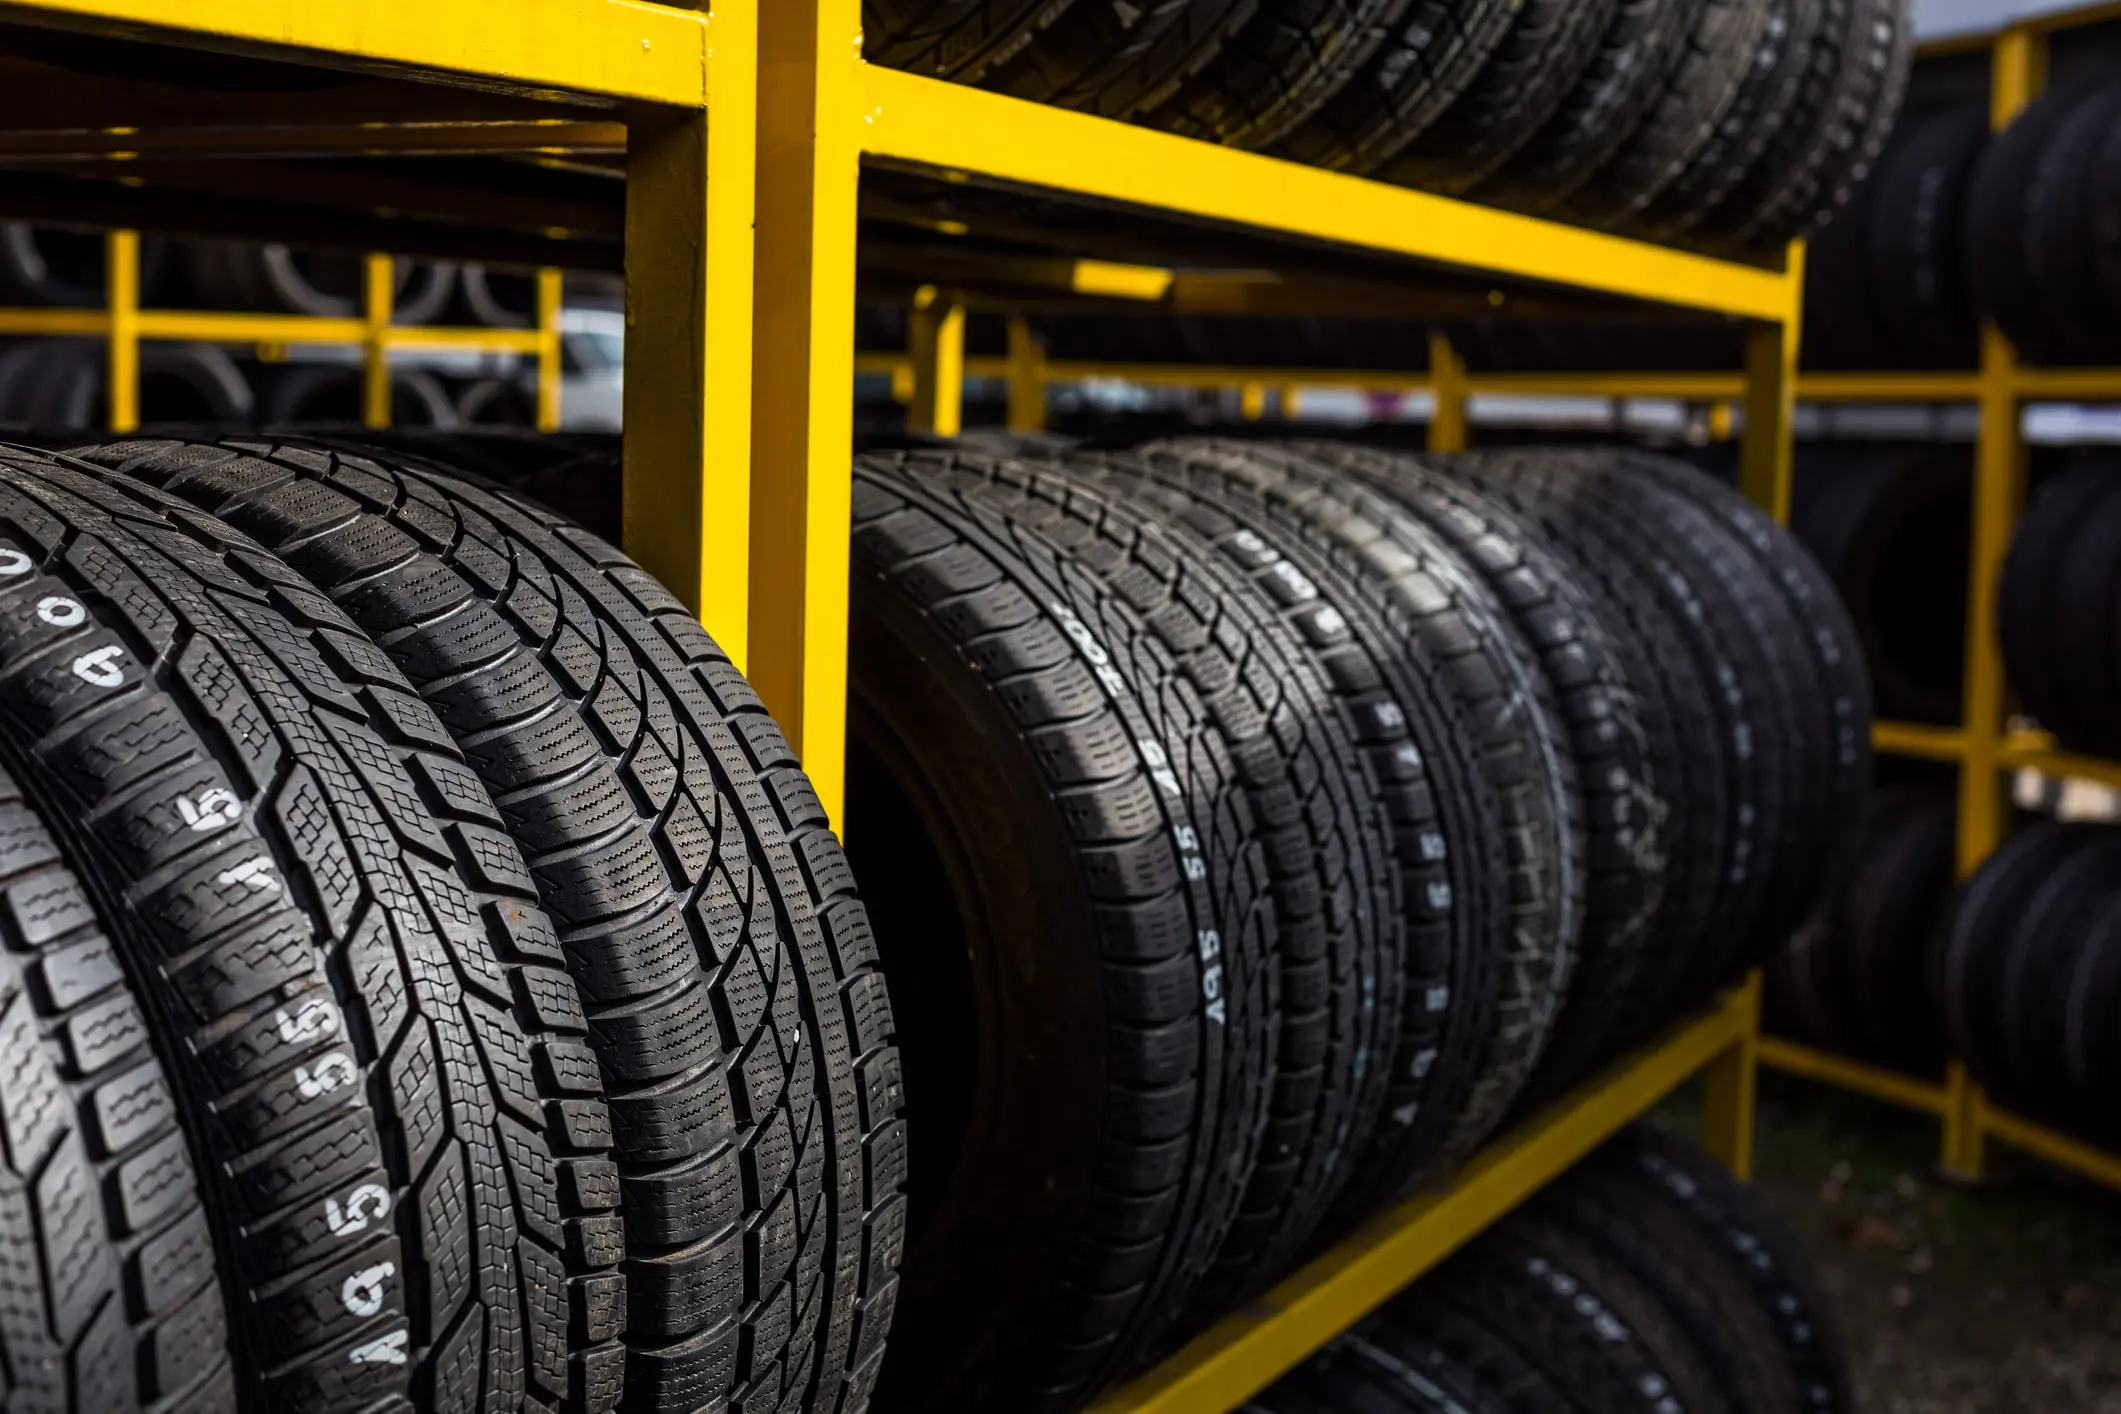 End-to-End Traceability System for Tire Manufacturing